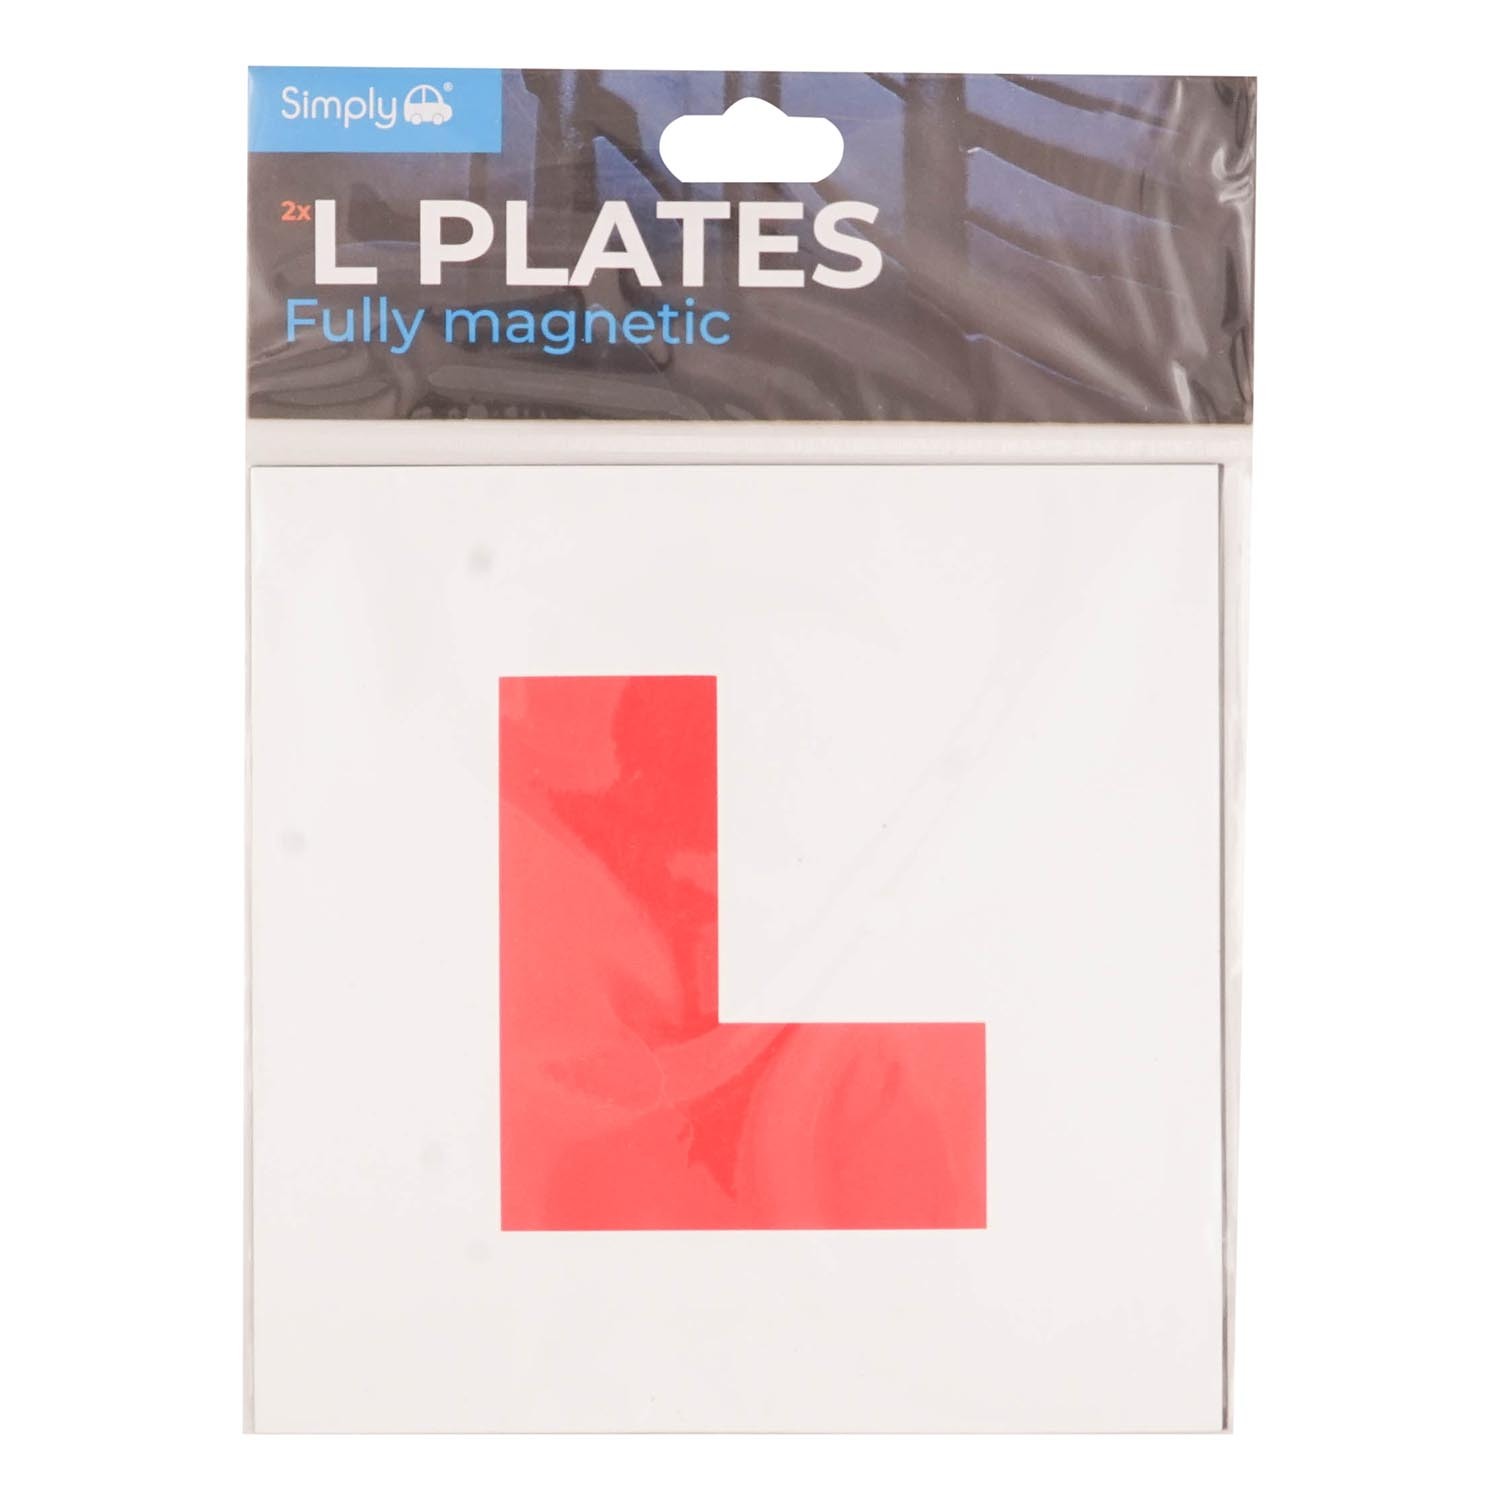 Simply Auto Fully Magnetic L Plates 2 Pack Image 1